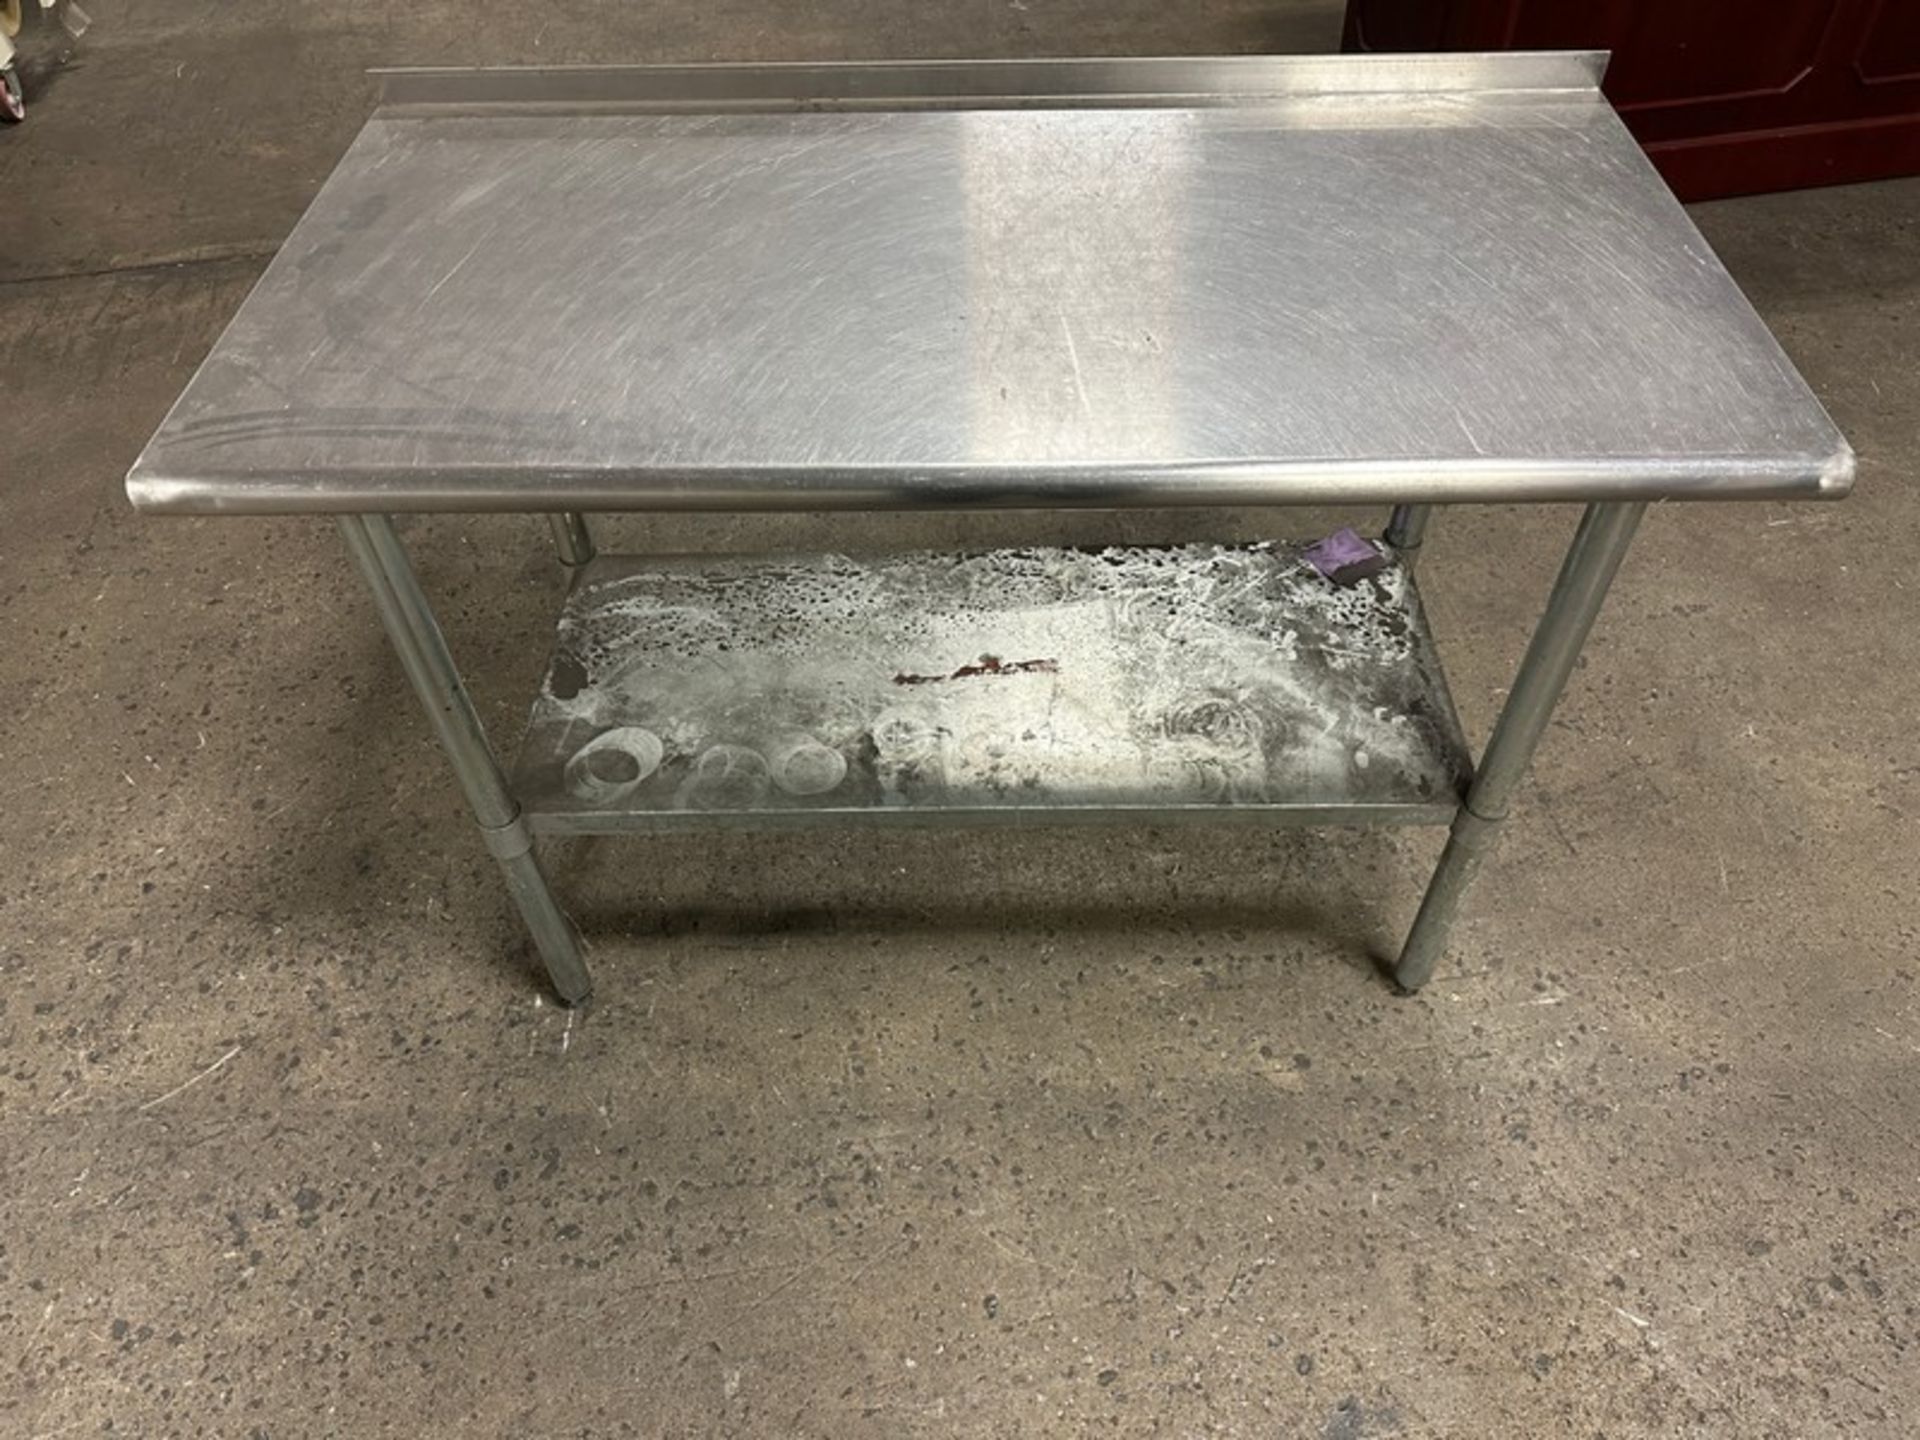 Table: Stainless steel 48" x 24" (Located East Rutherford, NJ) (NOTE: REMOVAL 2-DAYS ONLY THURSDAY/